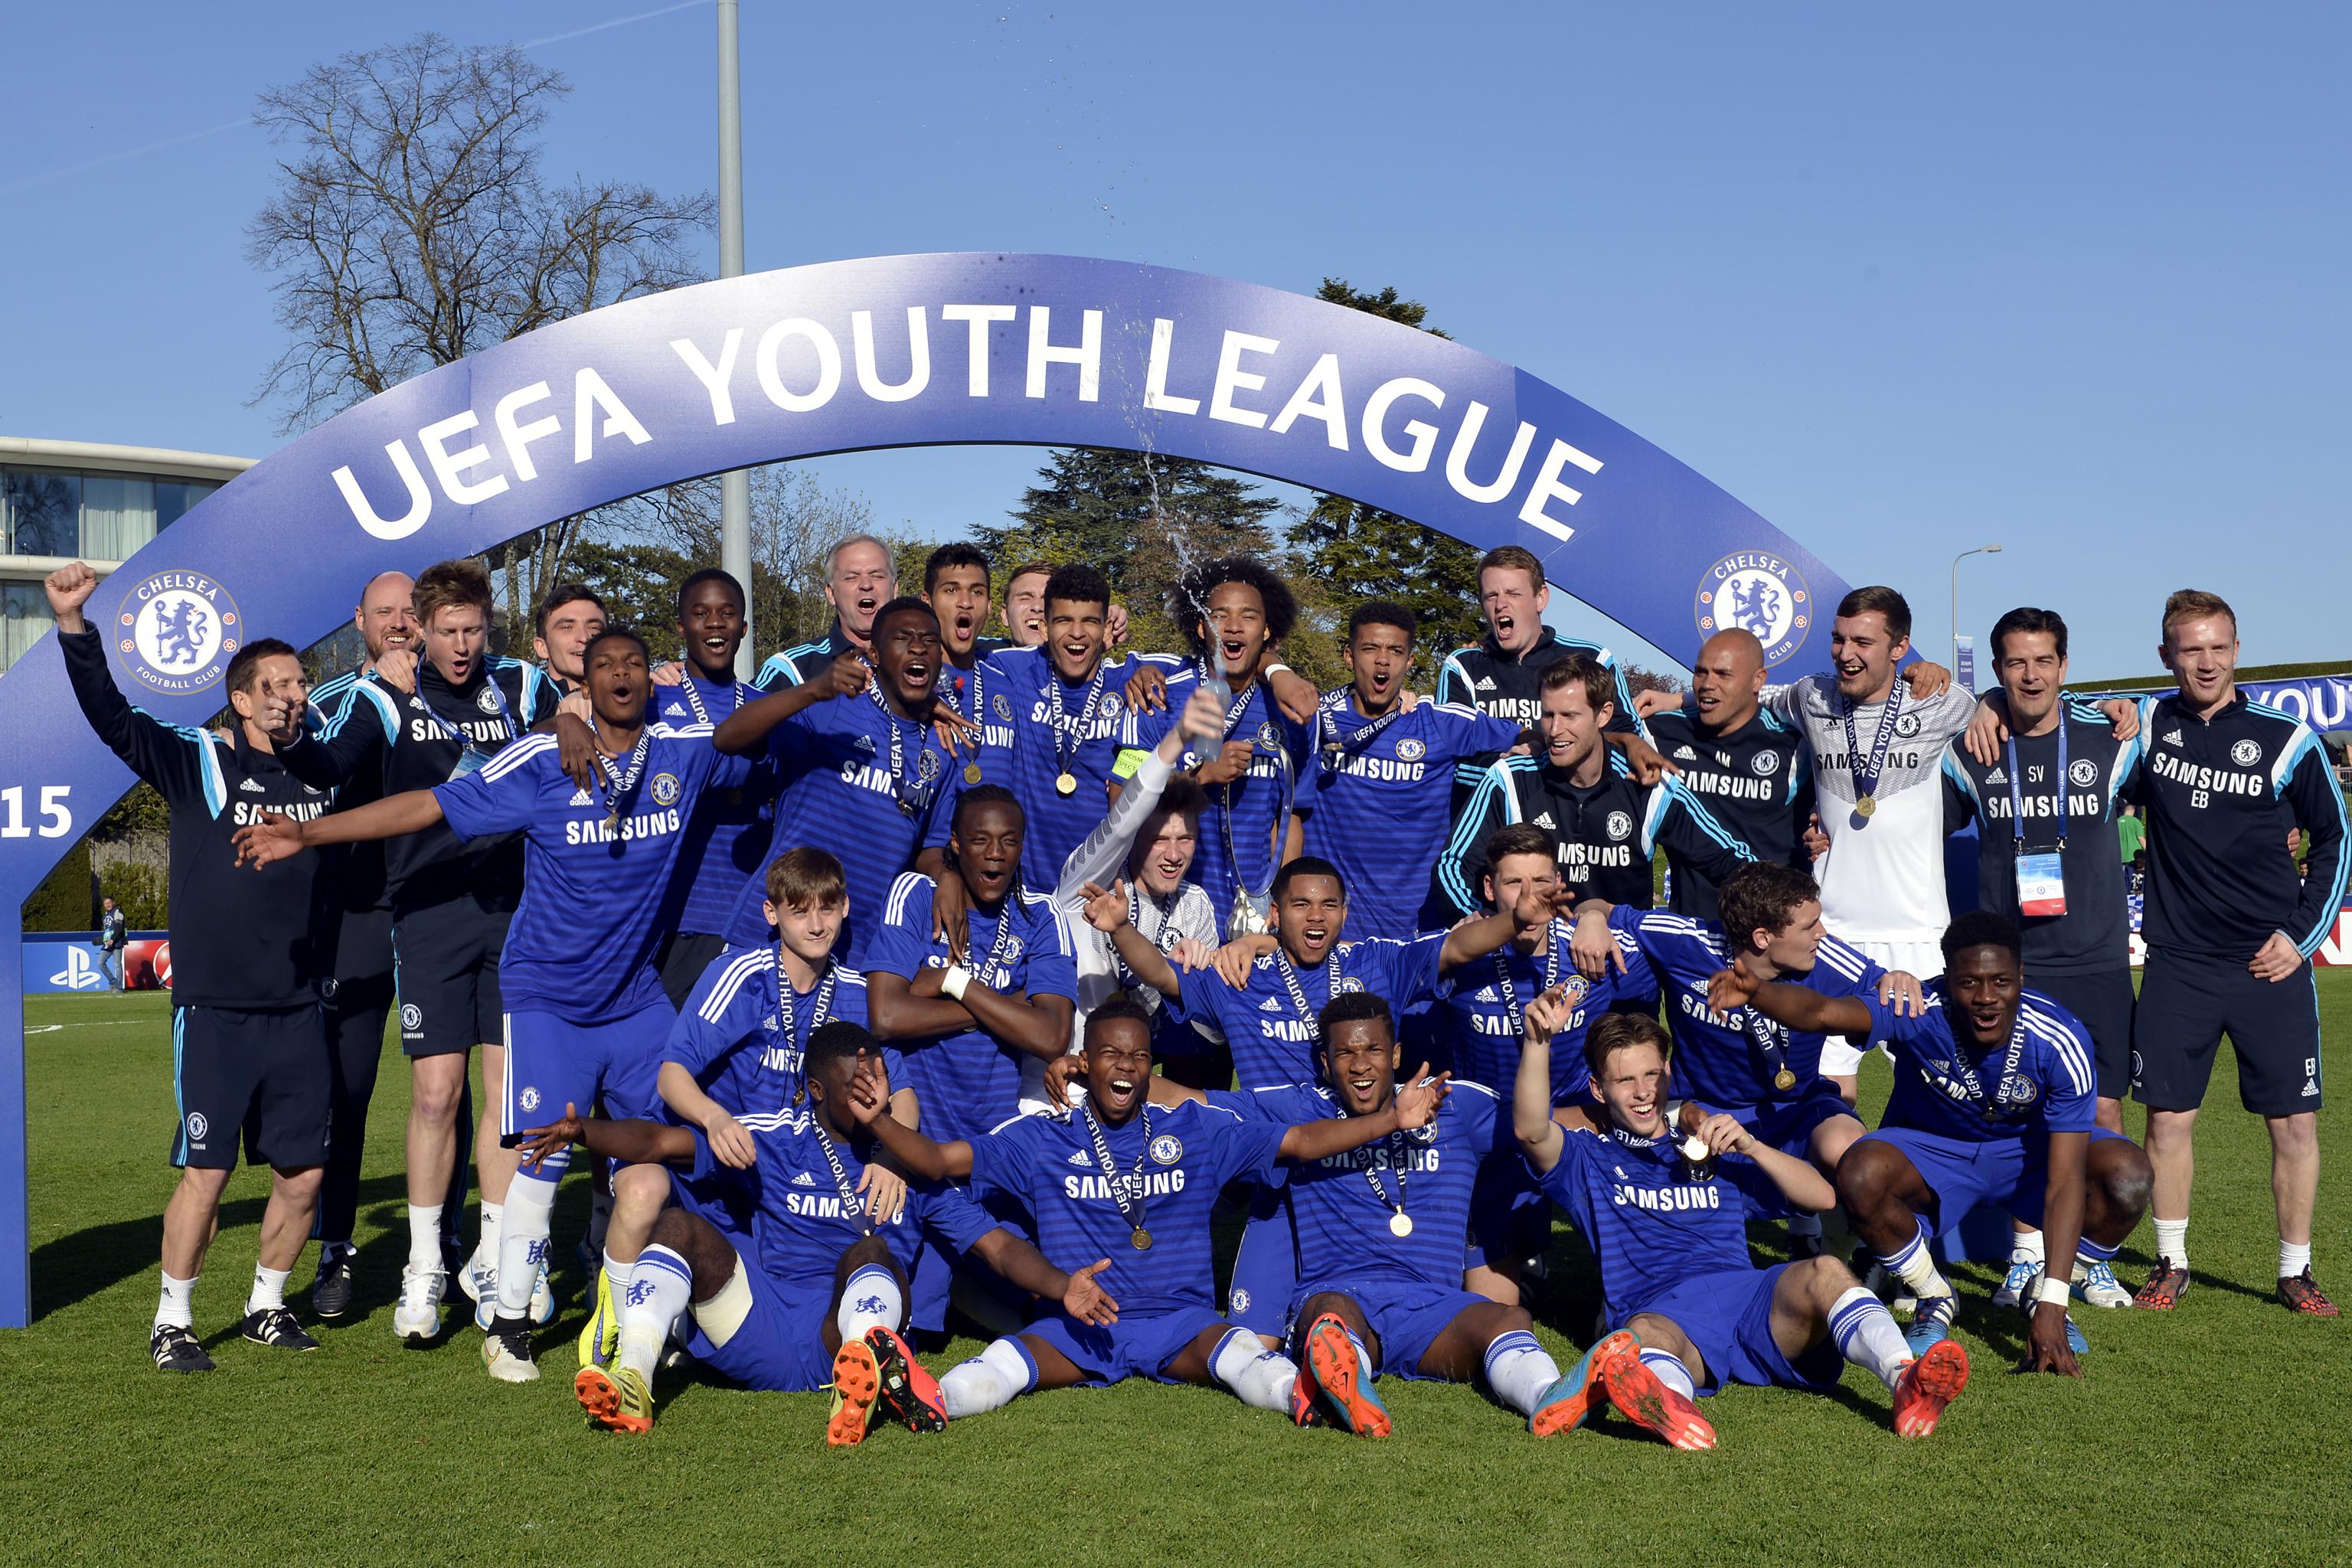 Uefa Youth League 15 Results Wednesday Scores Standings Next Fixtures Bleacher Report Latest News Videos And Highlights